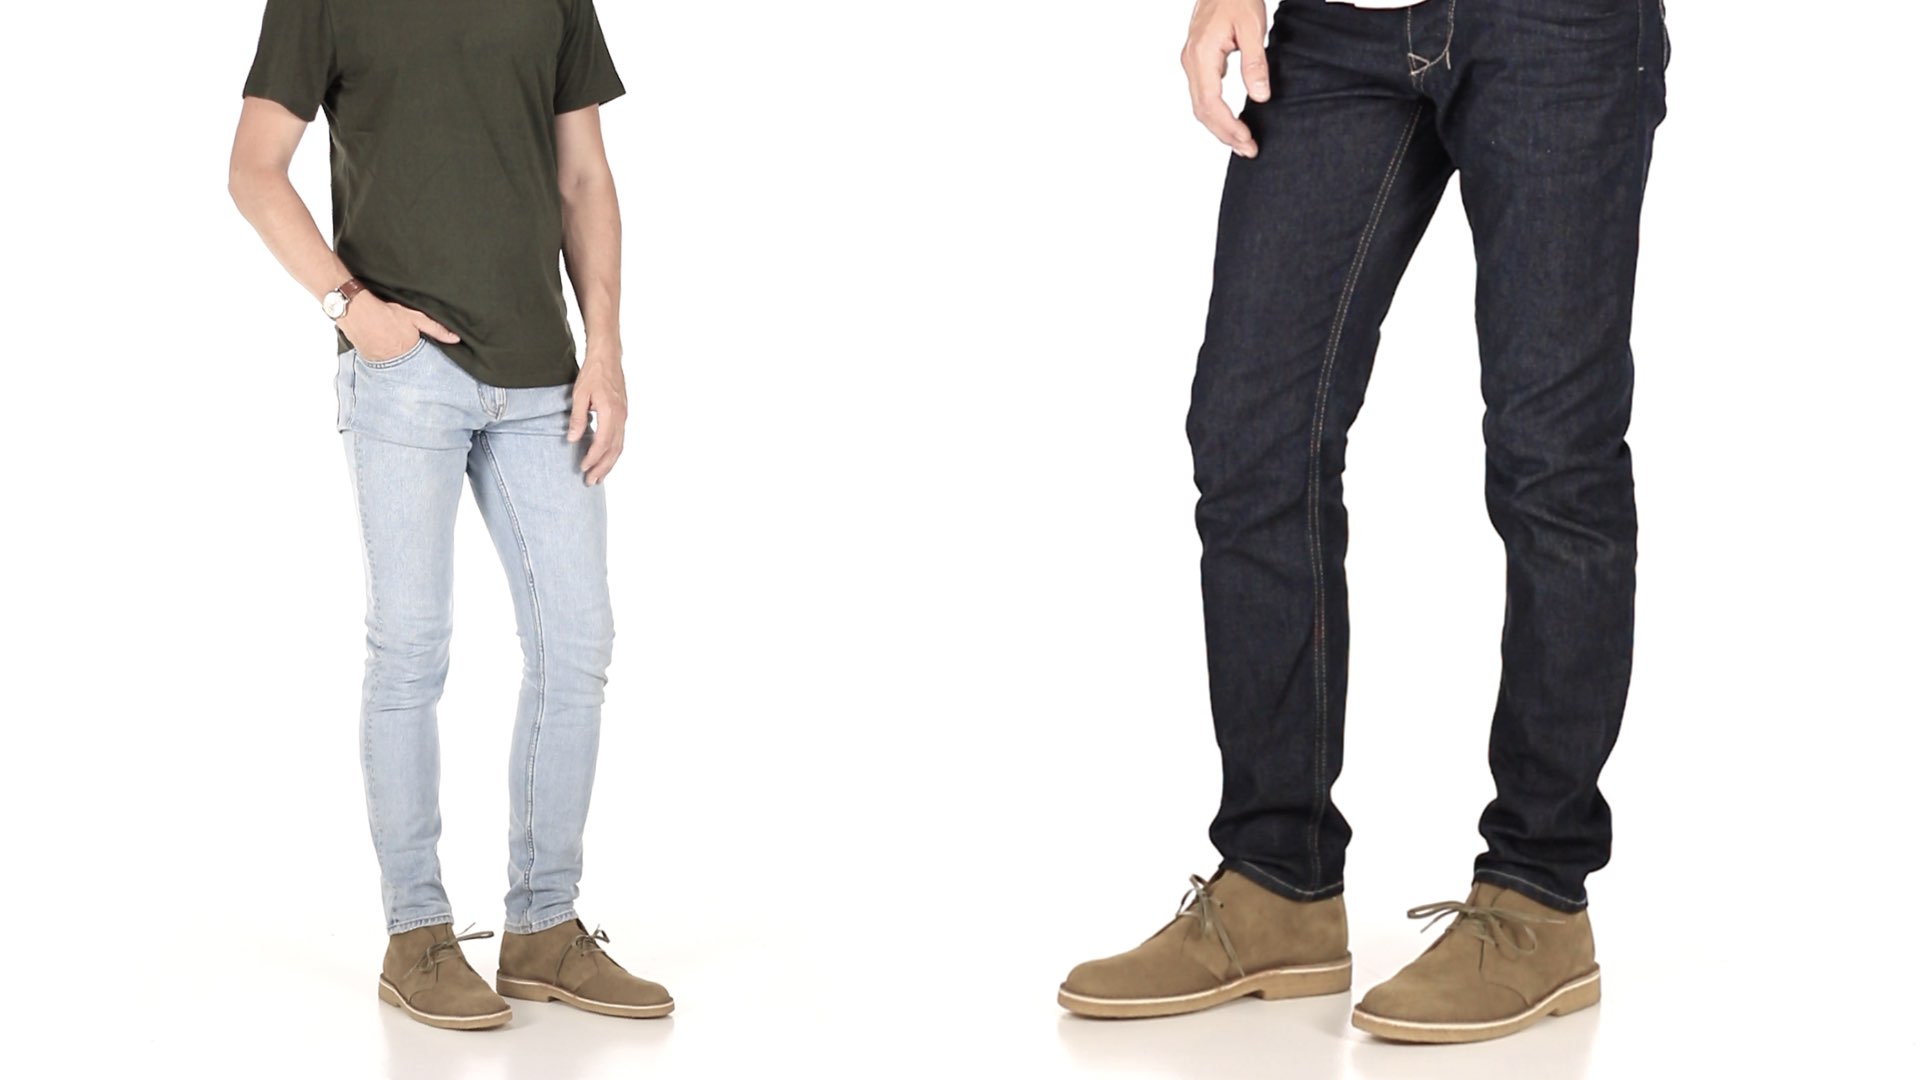 037 Desert boots with jeans